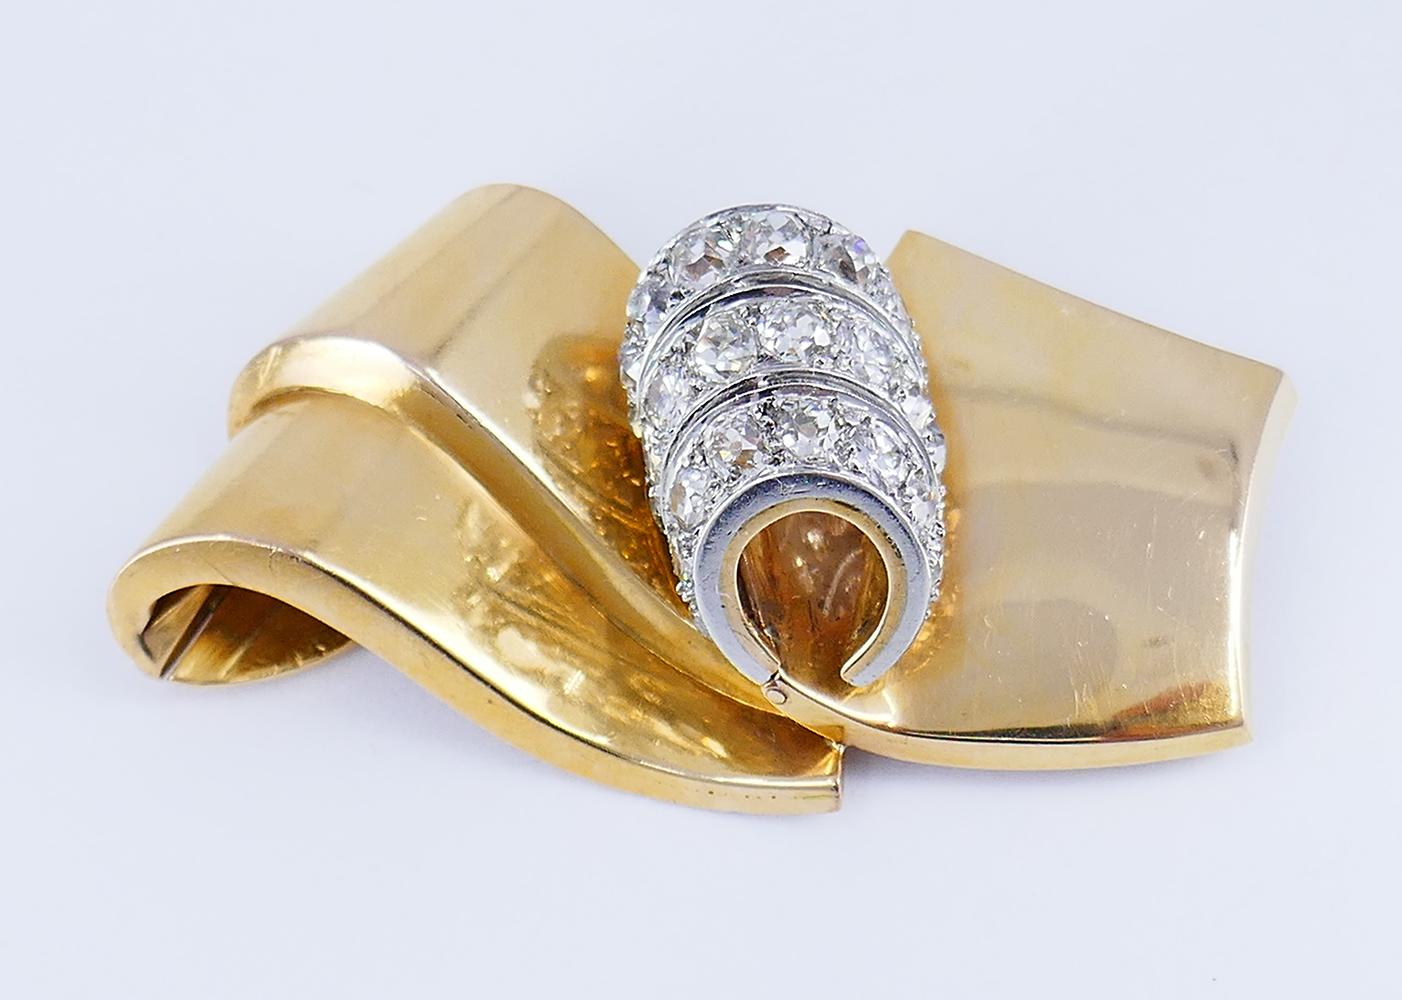         A French chic retro diamond brooch by Chaumet Paris made of 18 karat gold and platinum.

	During the Retro jewelry era, scrolls became one of the most popular design motifs. In this brooch Chaumet perfected the fluidity of the scroll shape.